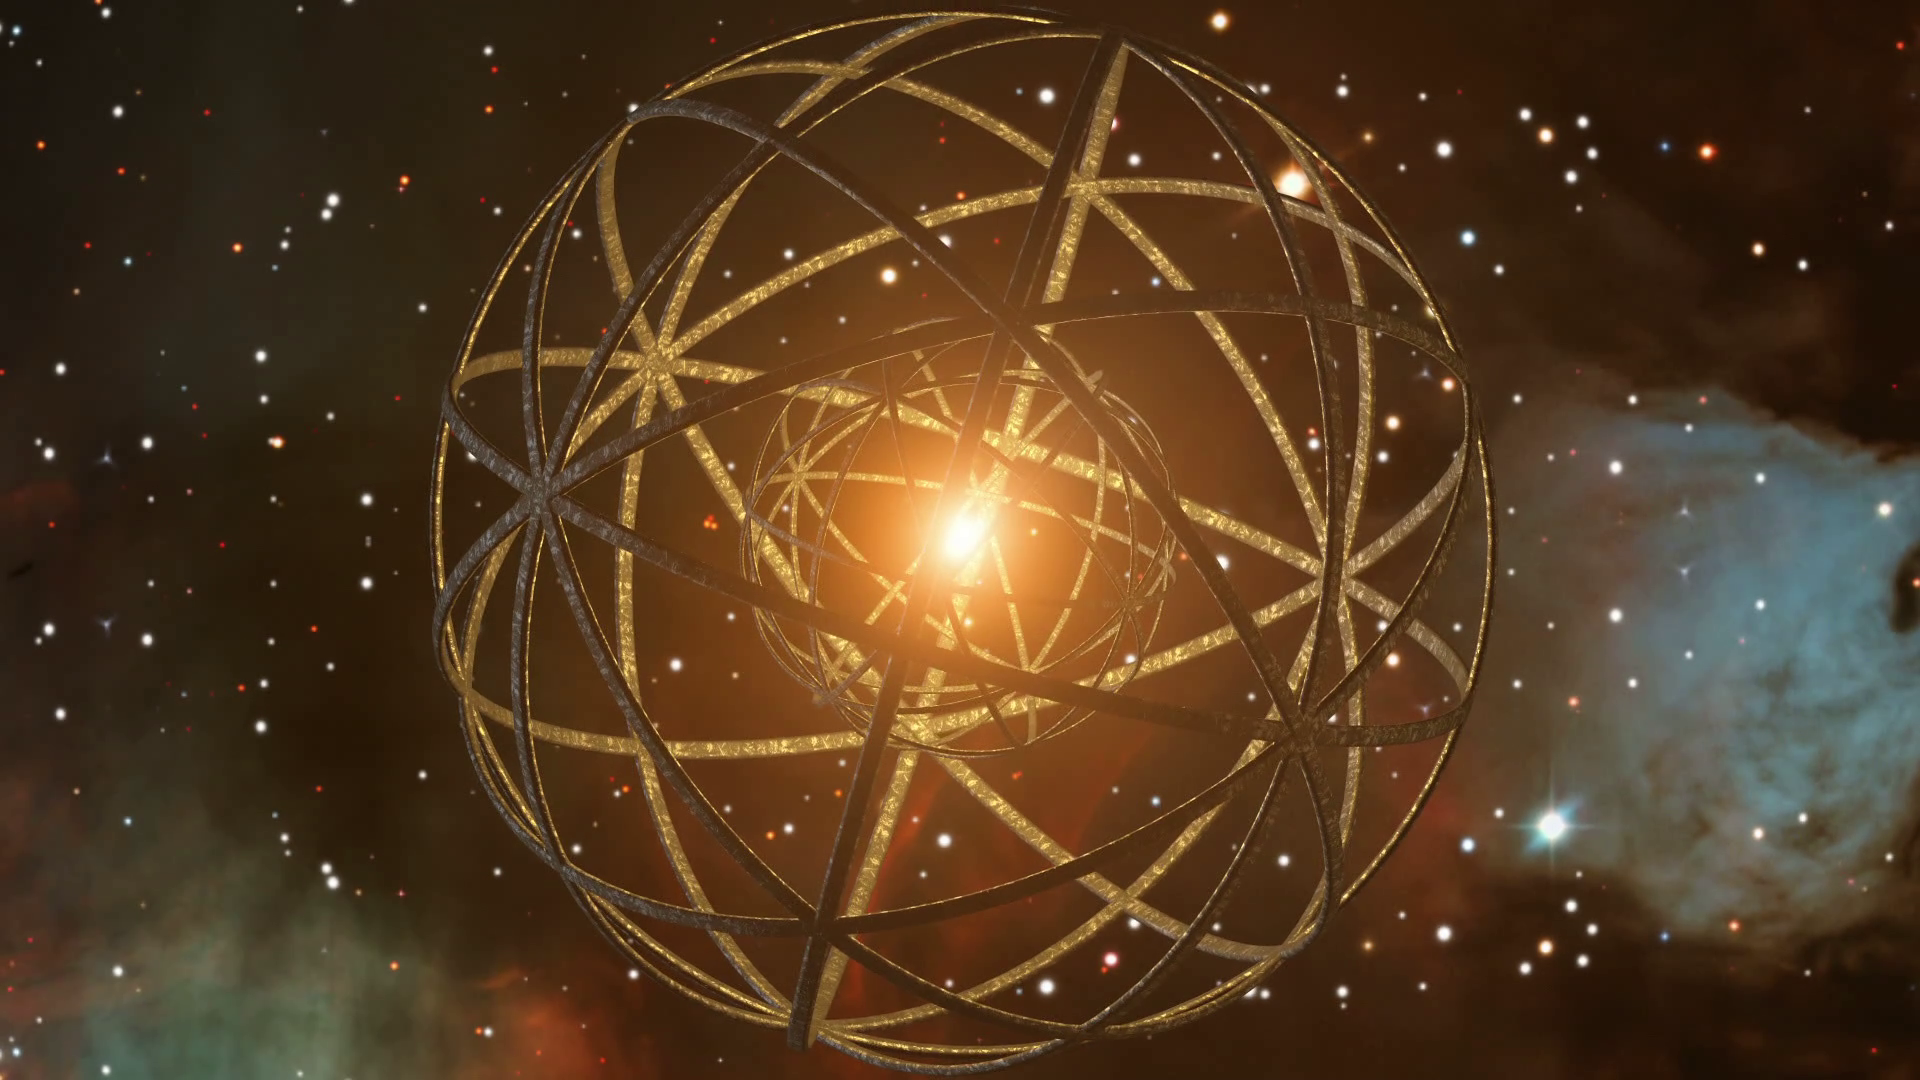 Harnessing The Sun S Energy Building The Dyson Sphere Images, Photos, Reviews